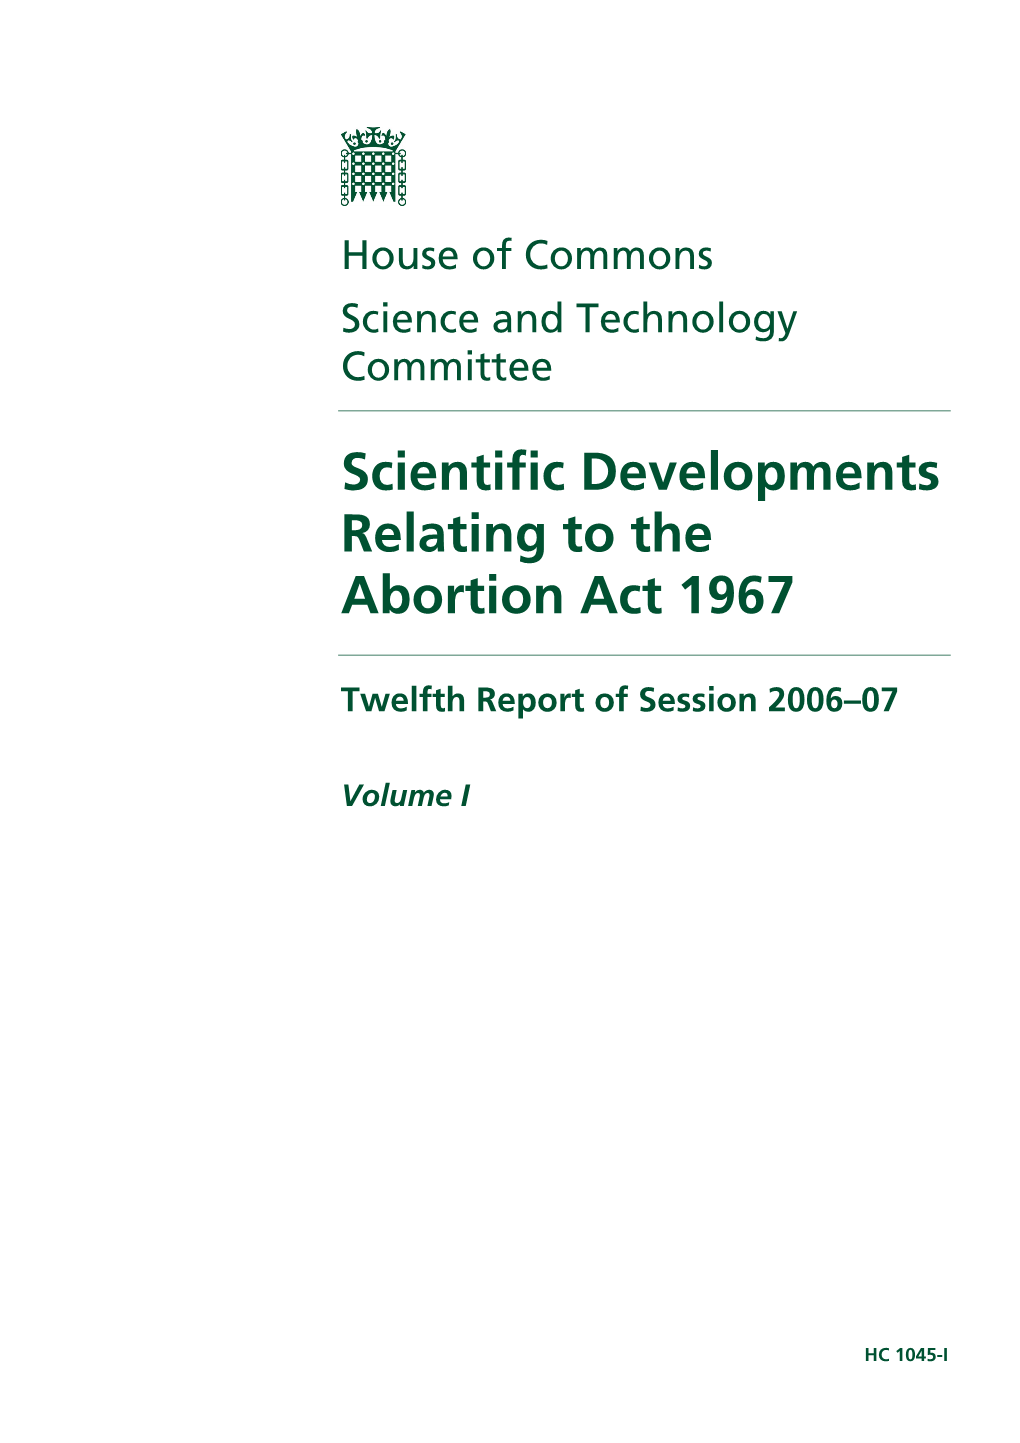 Scientific Developments Relating to the Abortion Act 1967